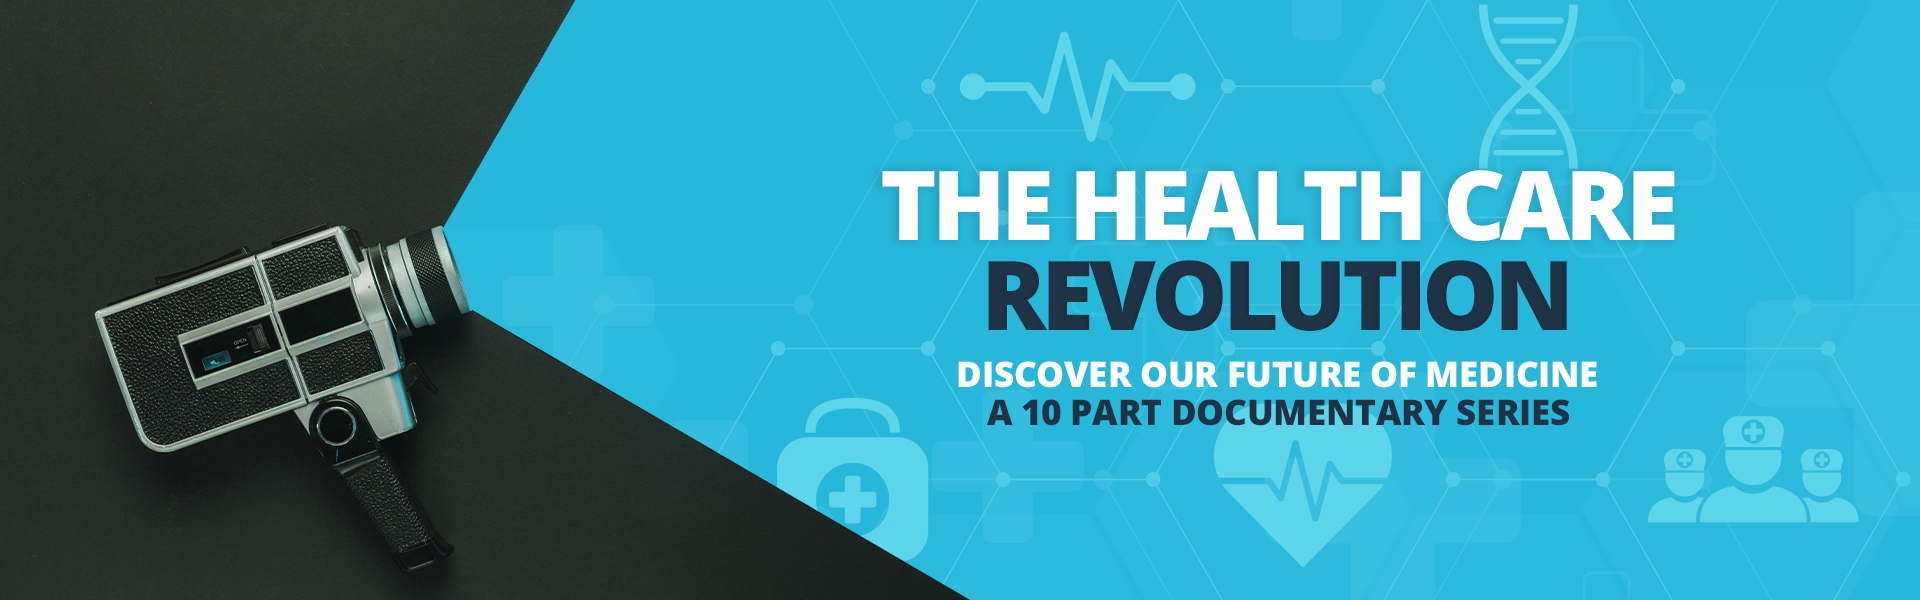 The Health Care Revolution - Discover our future of Medicine - A 10 part documentary series